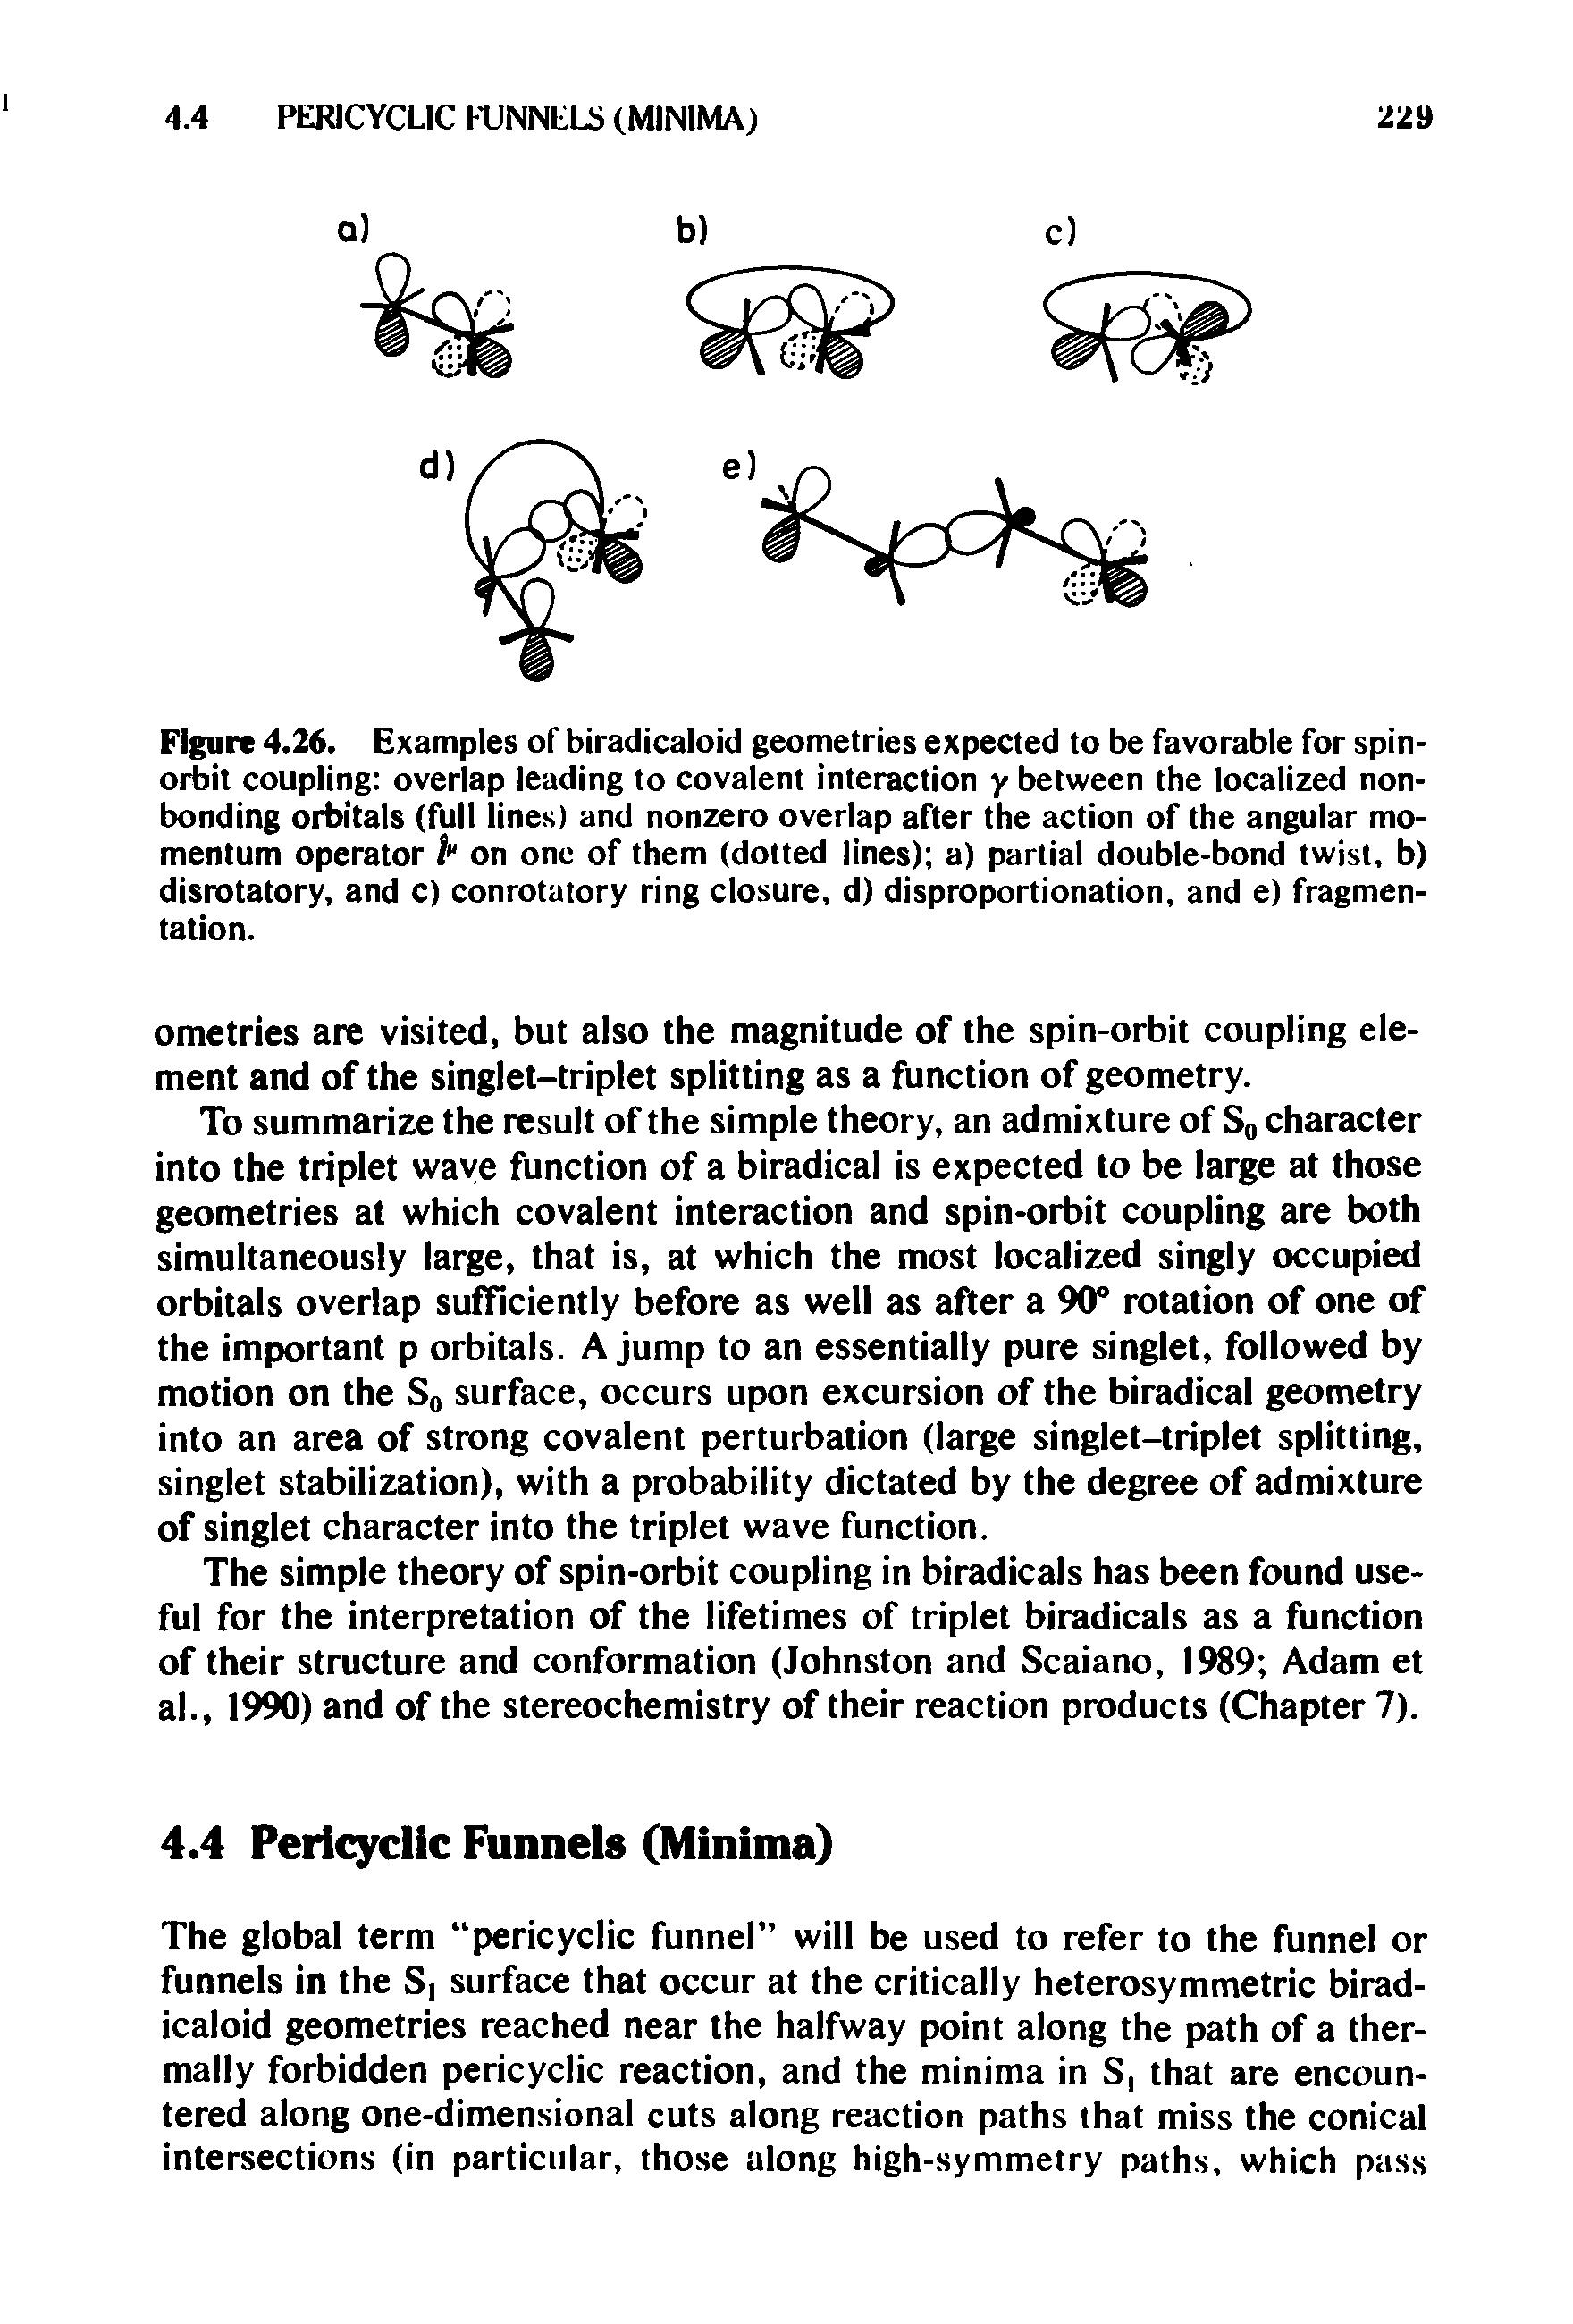 Figure 4.26. Examples of biradicaloid geometries expected to be favorable for spin-orbit coupling overlap leading to covalent interaction y between the localized nonbonding orbitals (full lines) and nonzero overlap after the action of the angular momentum operator /" on one of them (dotted lines) a) partial double-bond twist, b) disrotatory, and c) conrotutory ring closure, d) disproportionation, and e) fragmentation.